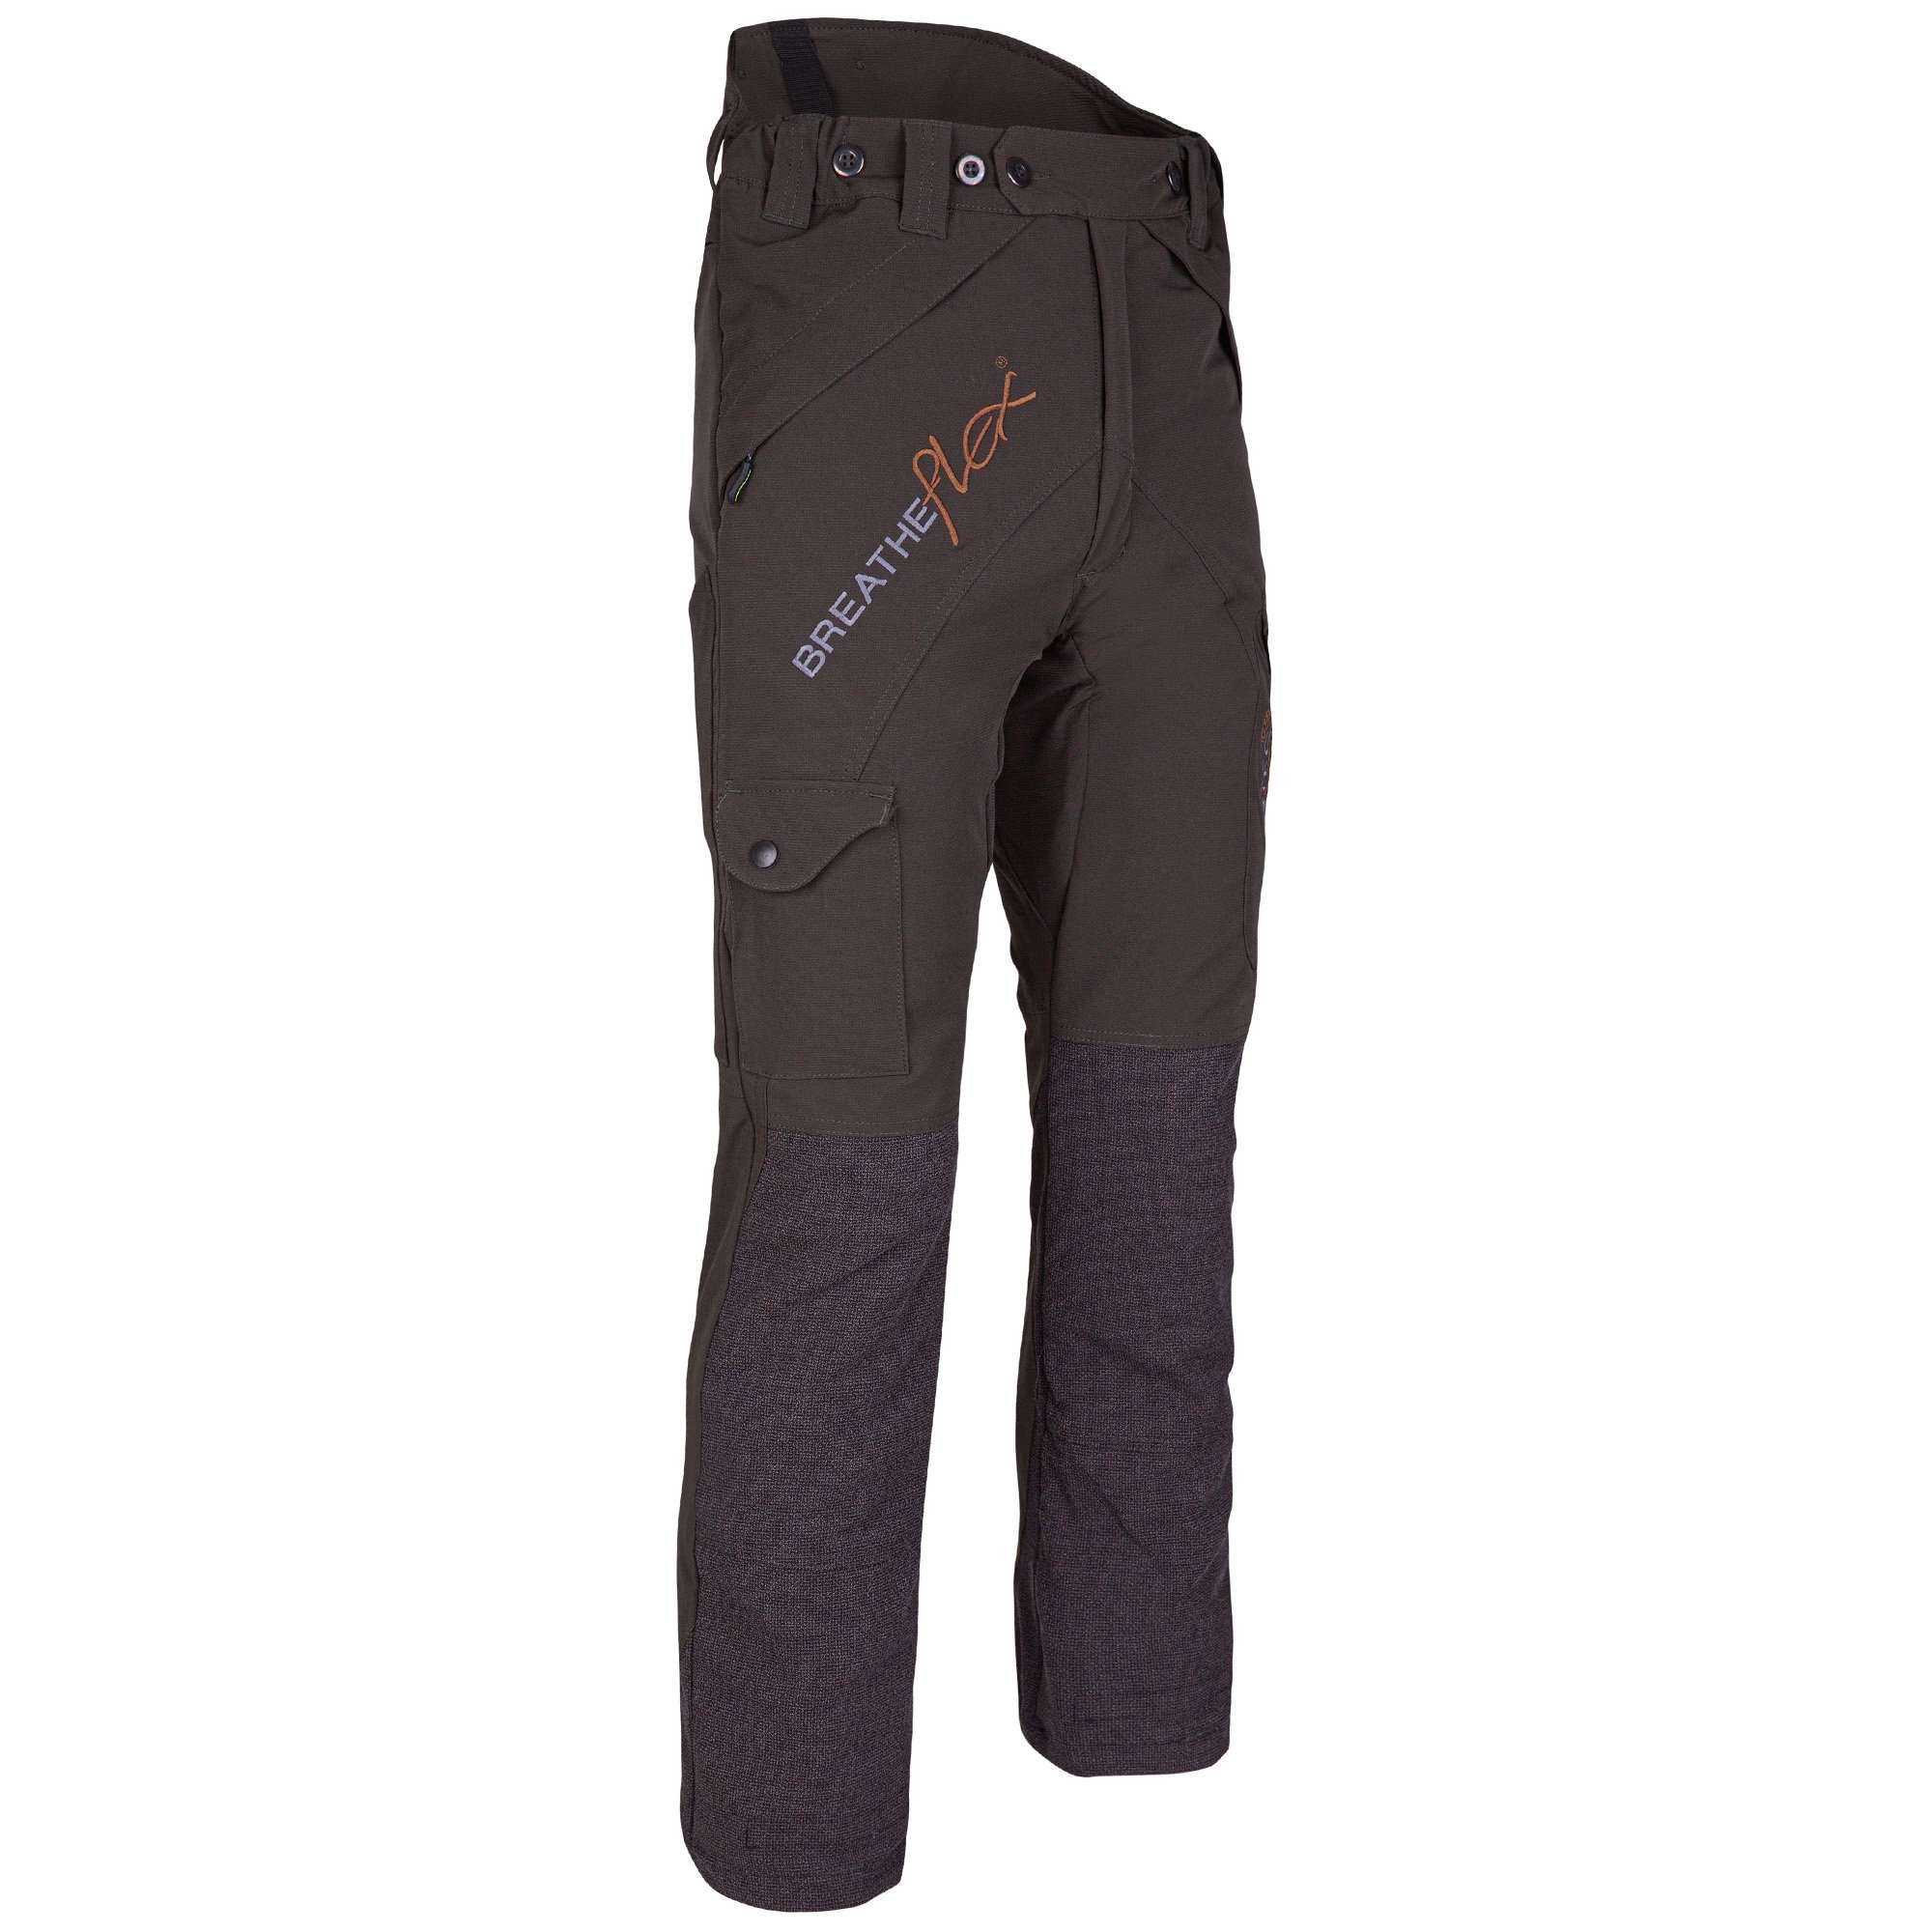 AT4050 Breatheflex Type C Class 1 Chainsaw Trousers - Olive - Arbortec Forestwear